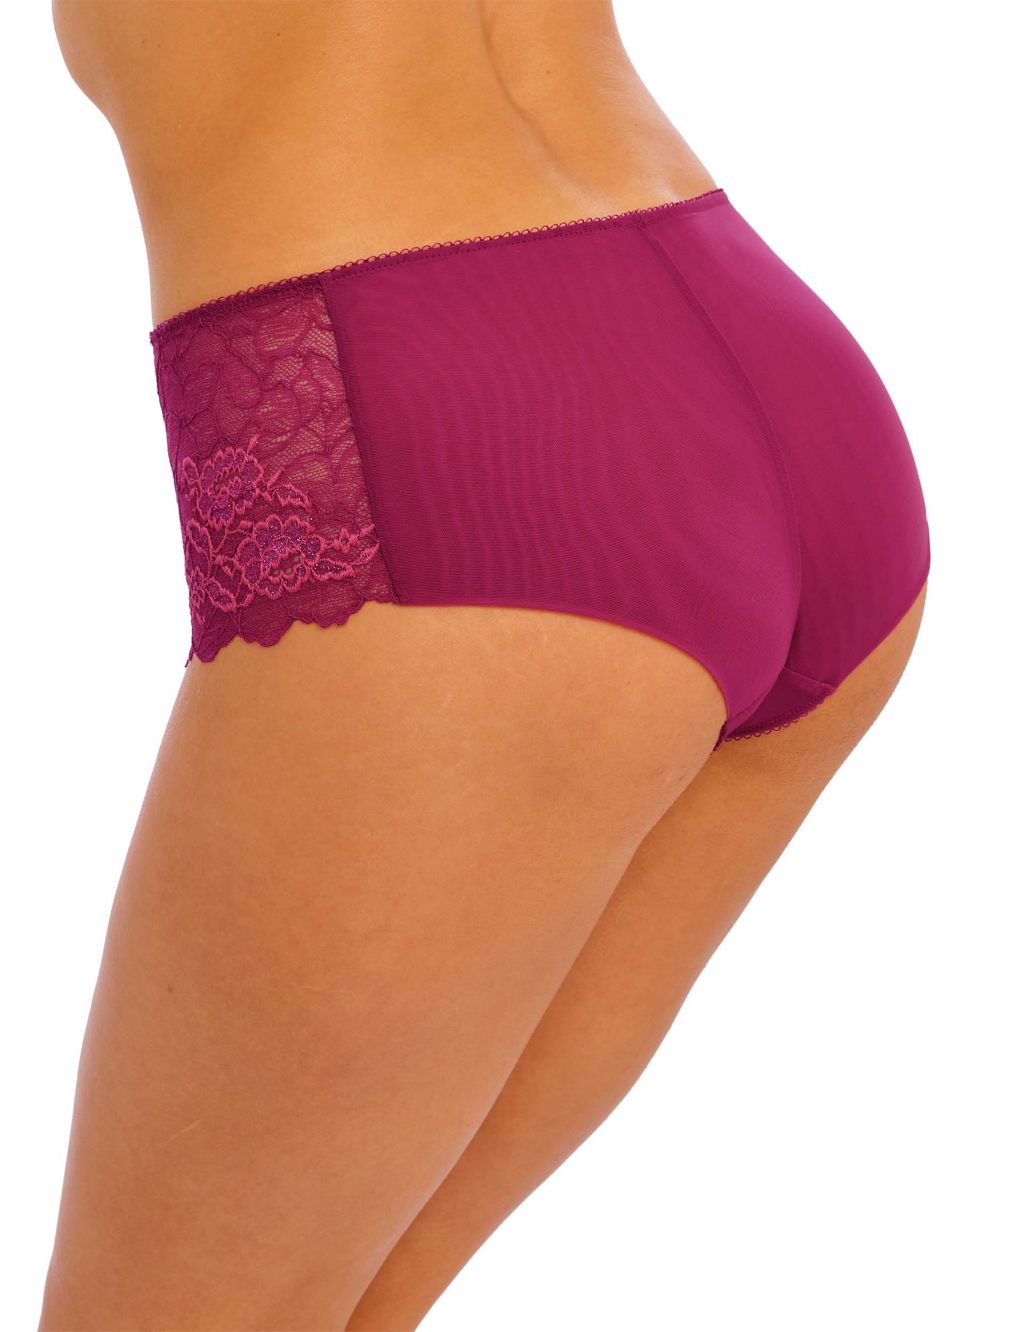 Lace Perfection Low Rise Shorts image 3